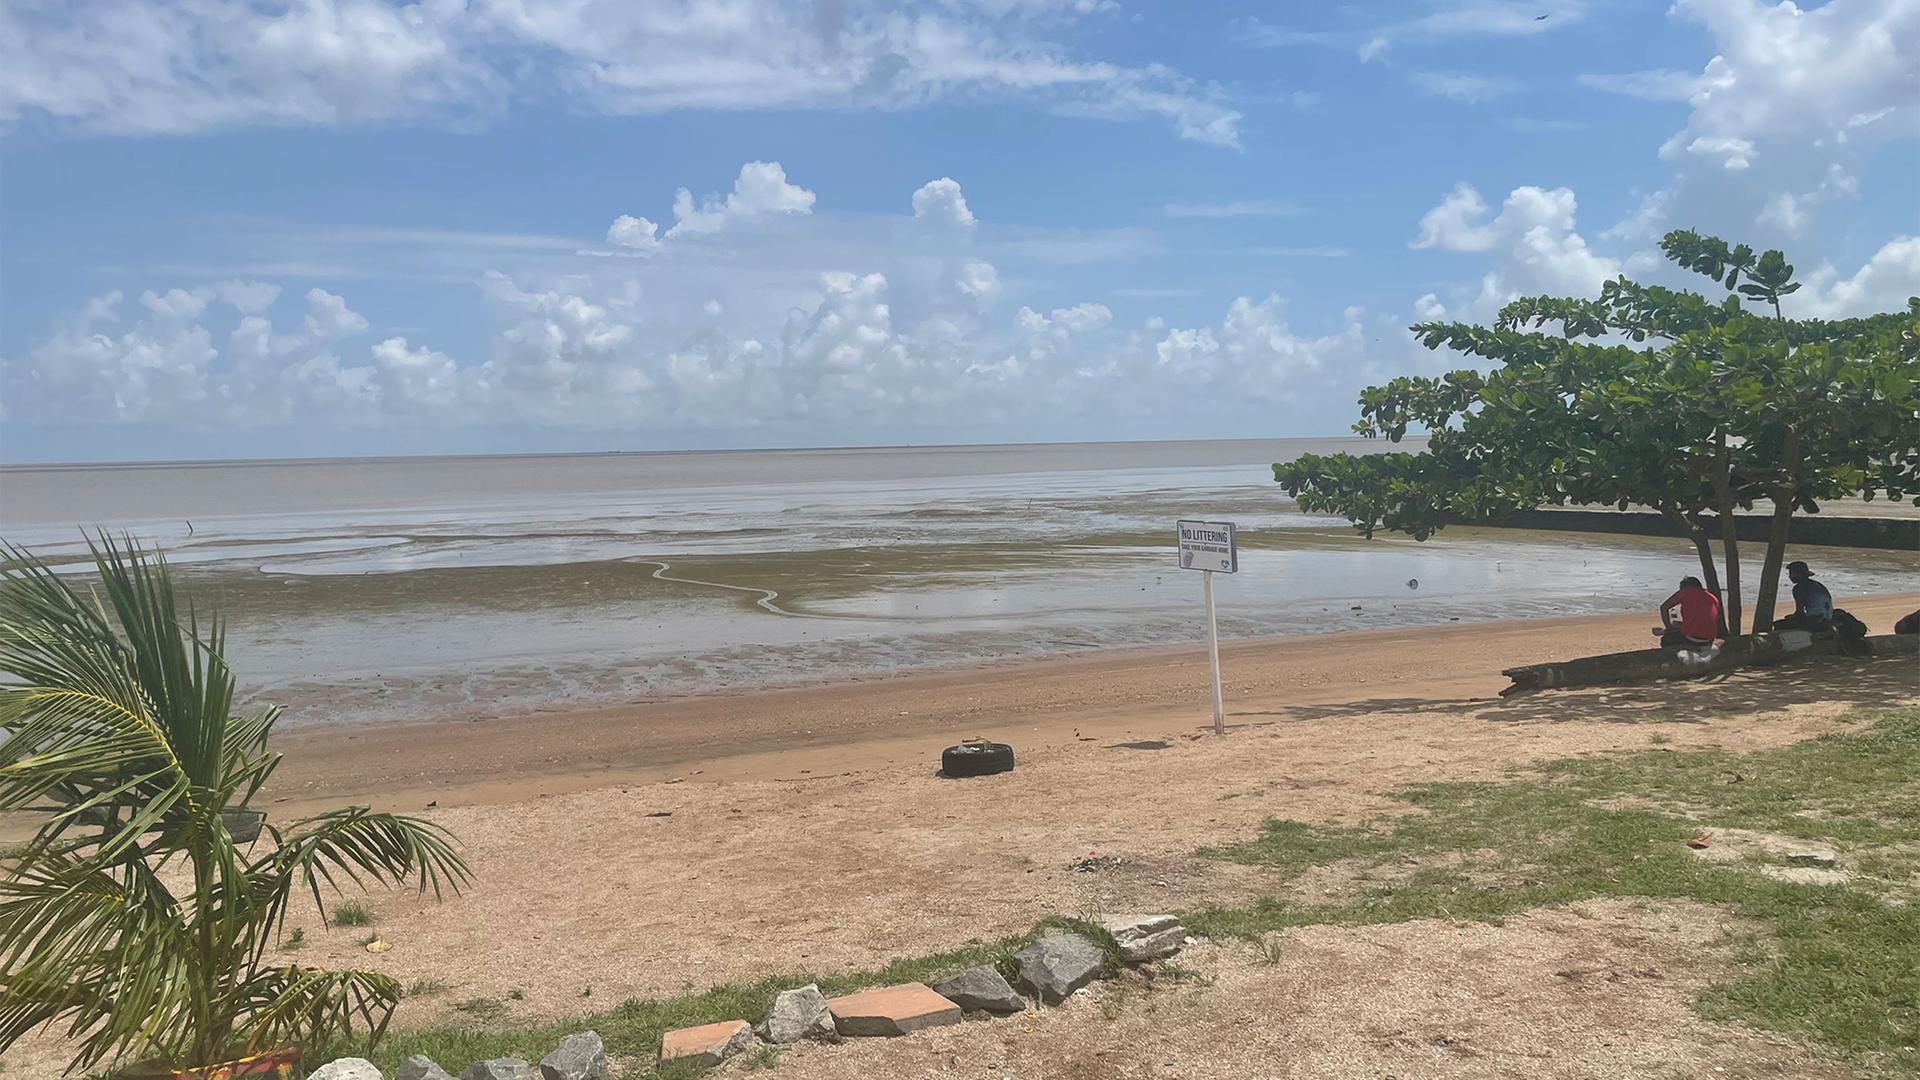 Guyana faces risks from climate change that include rising sea levels that could eventually submerge the capital Georgetown.